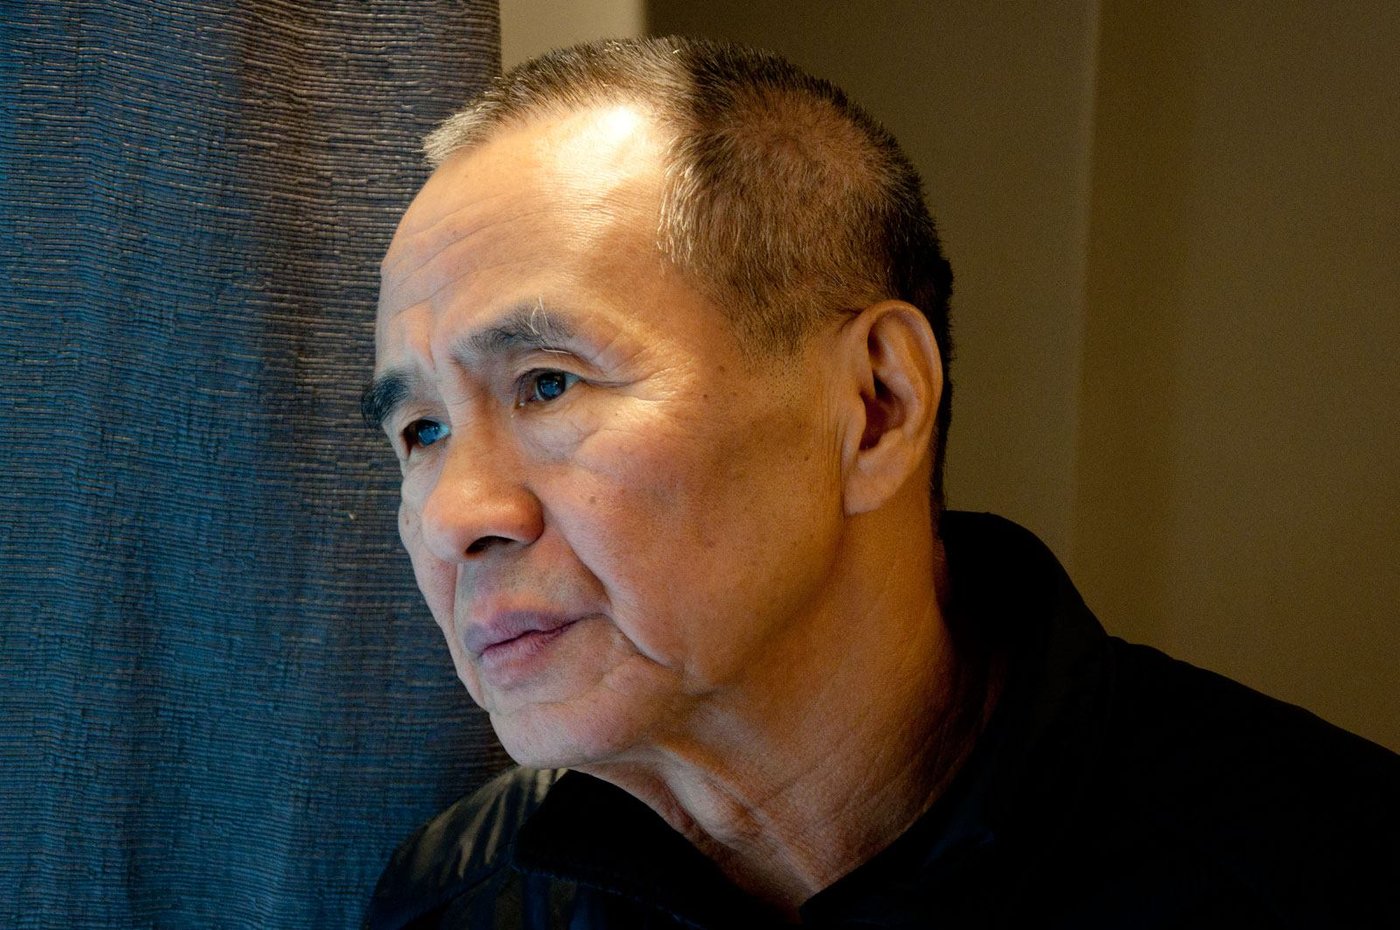 Further Questions for Hou Hsiao-hsien